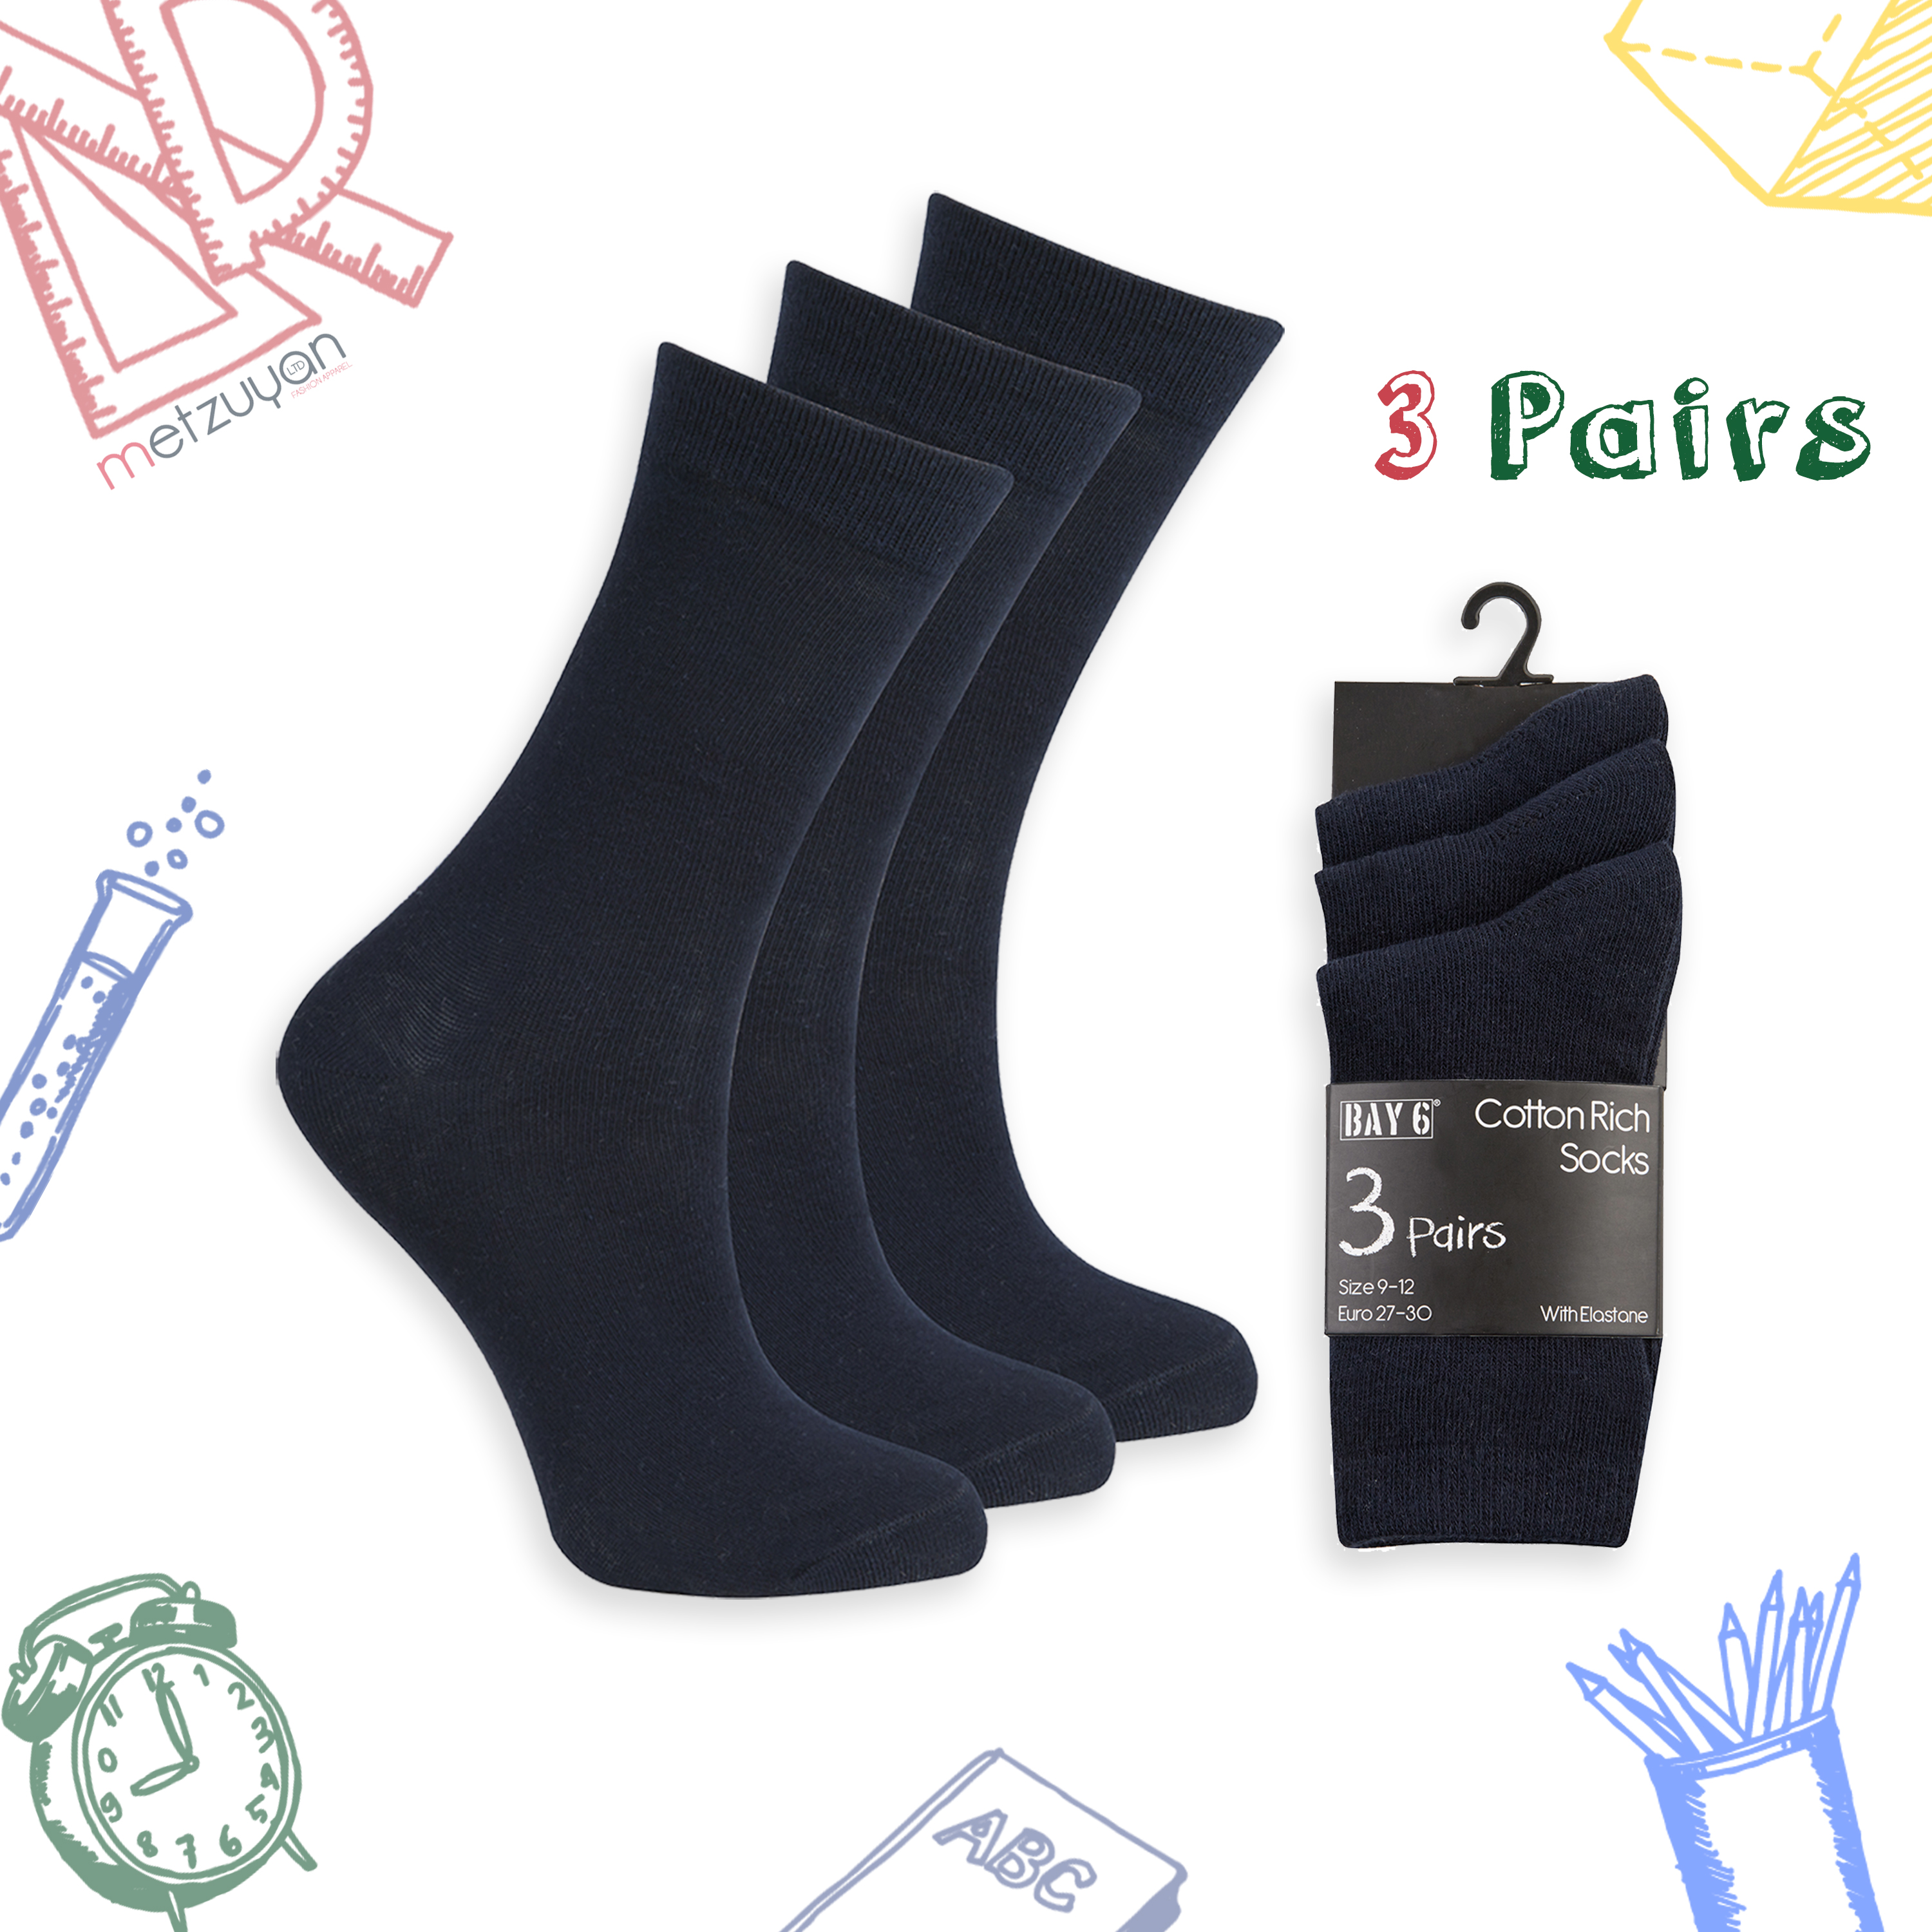 Childrens Unisex Plain Cotton Back to School Socks Blk/Gry/Nvy/Wht 3-6-9-12Pairs 